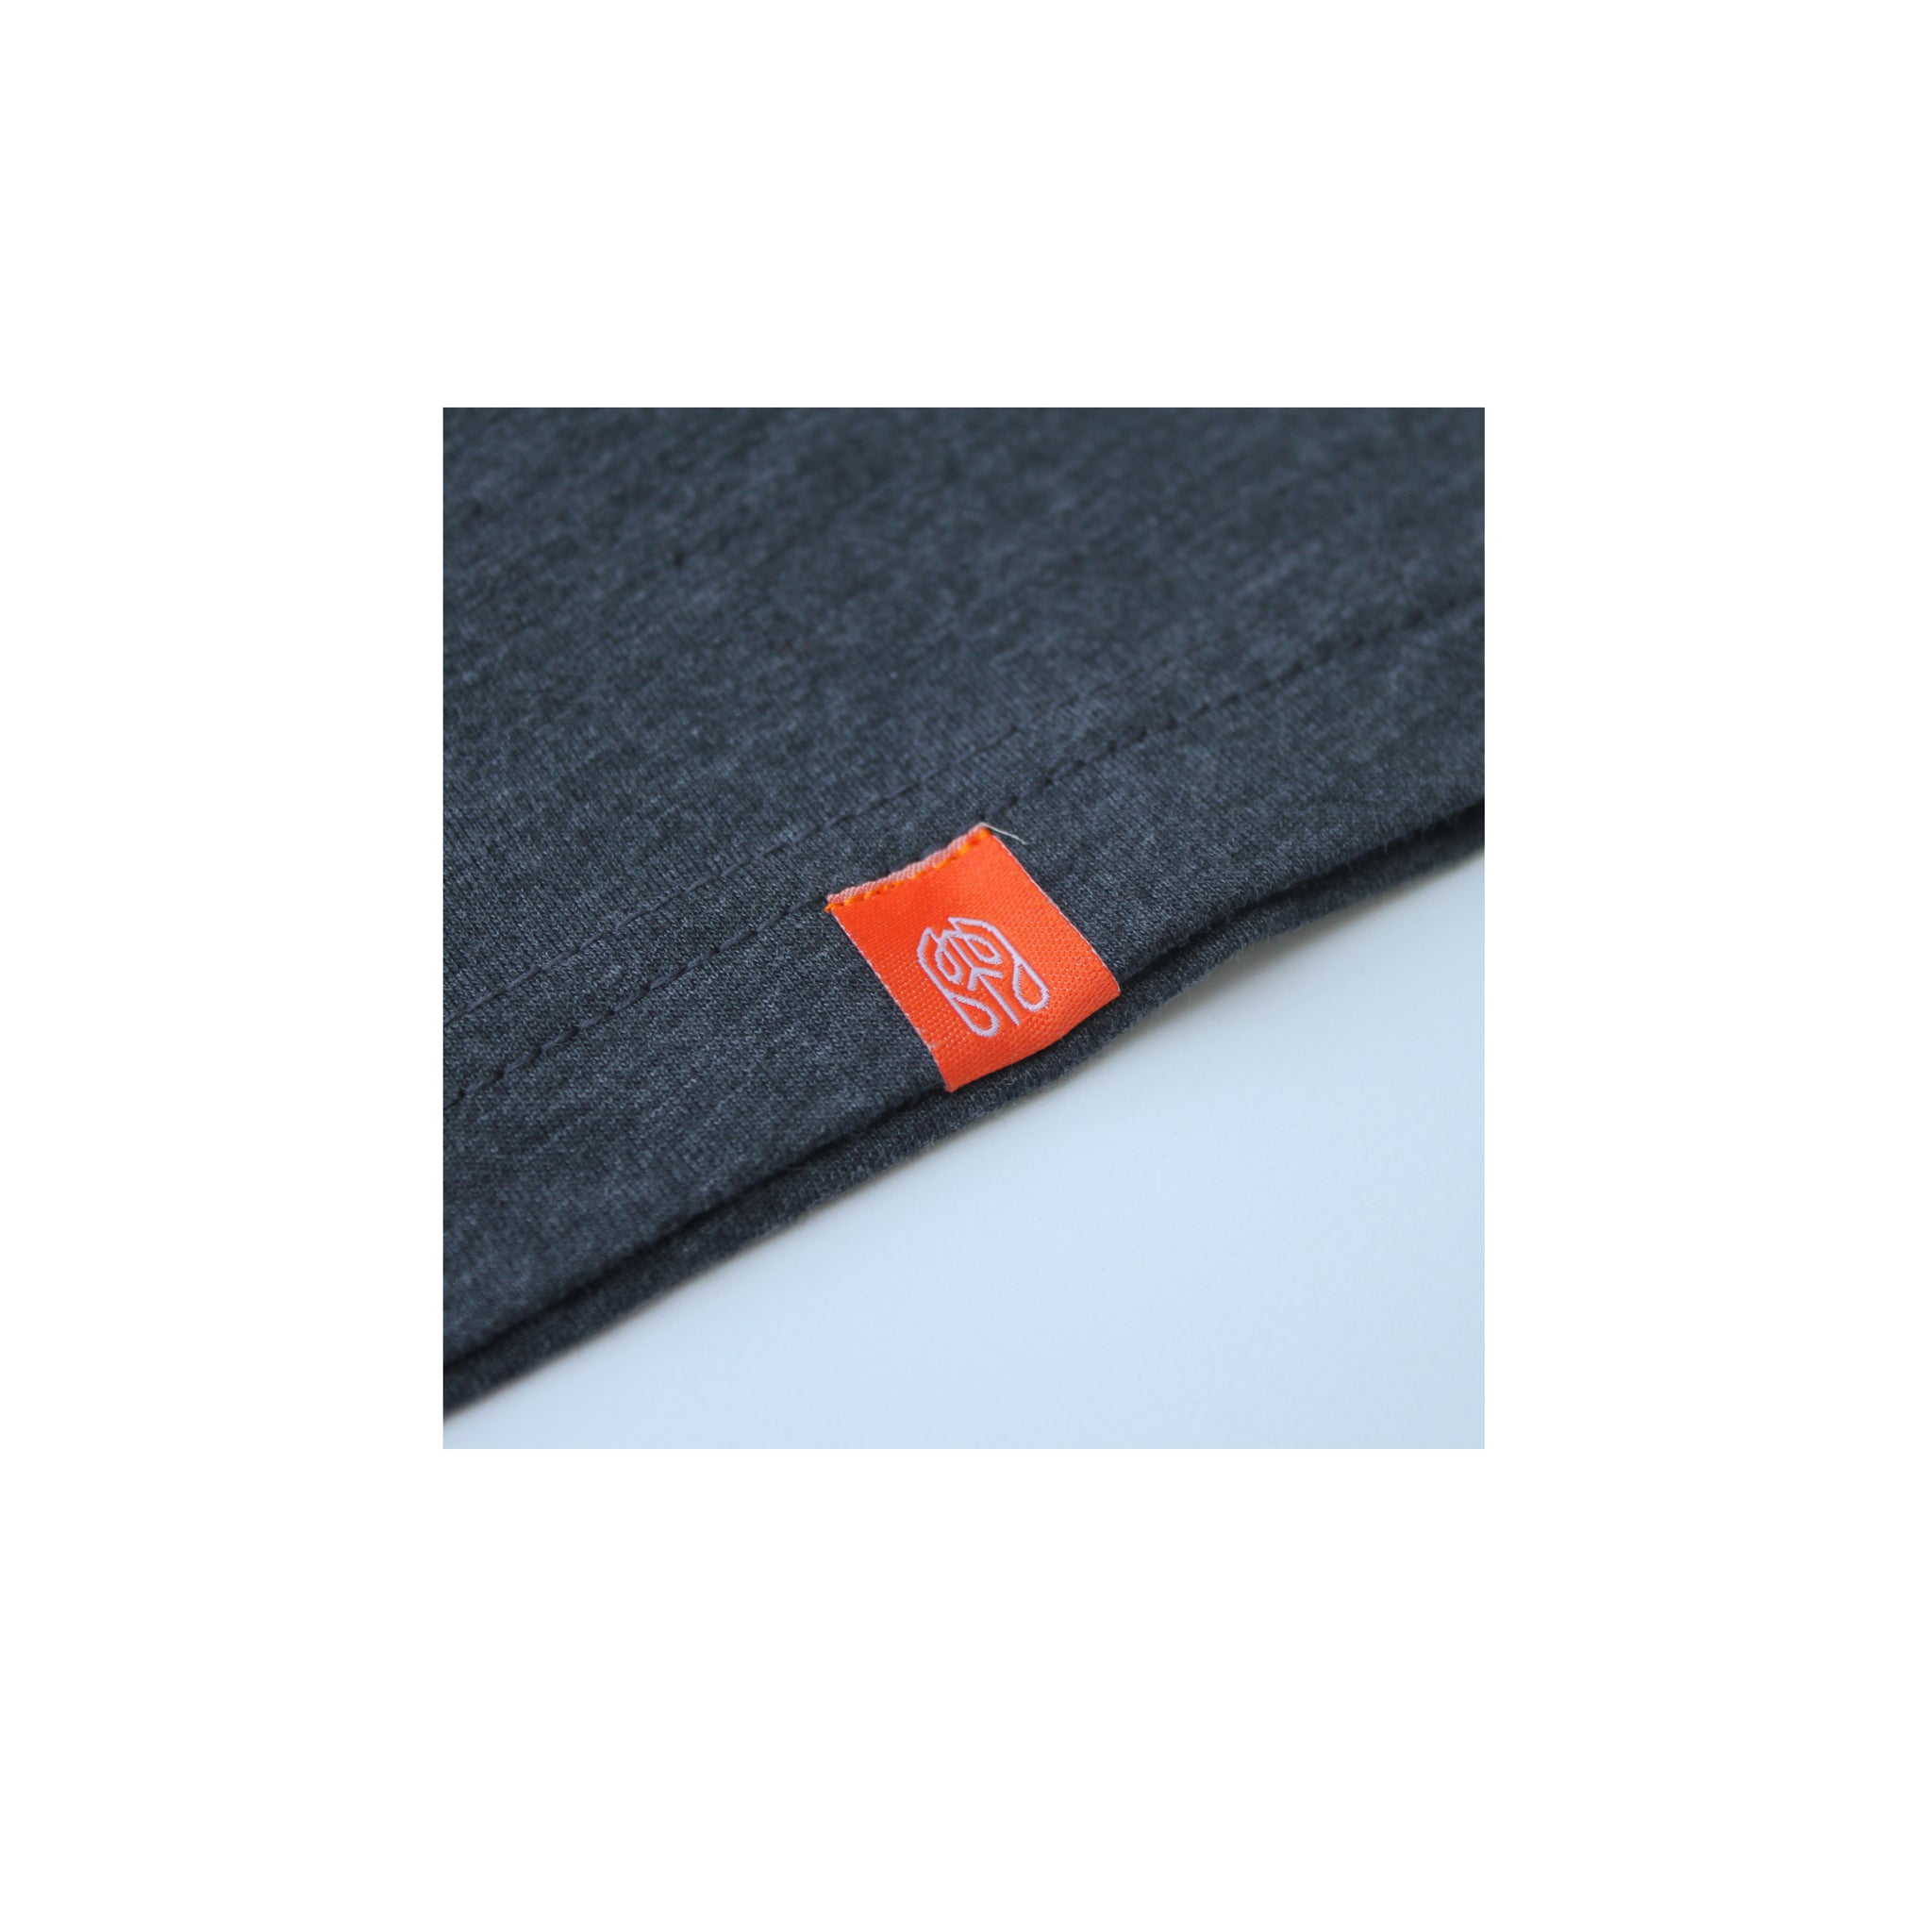 Charcoal - Common Ground T shirt Hem Tag View